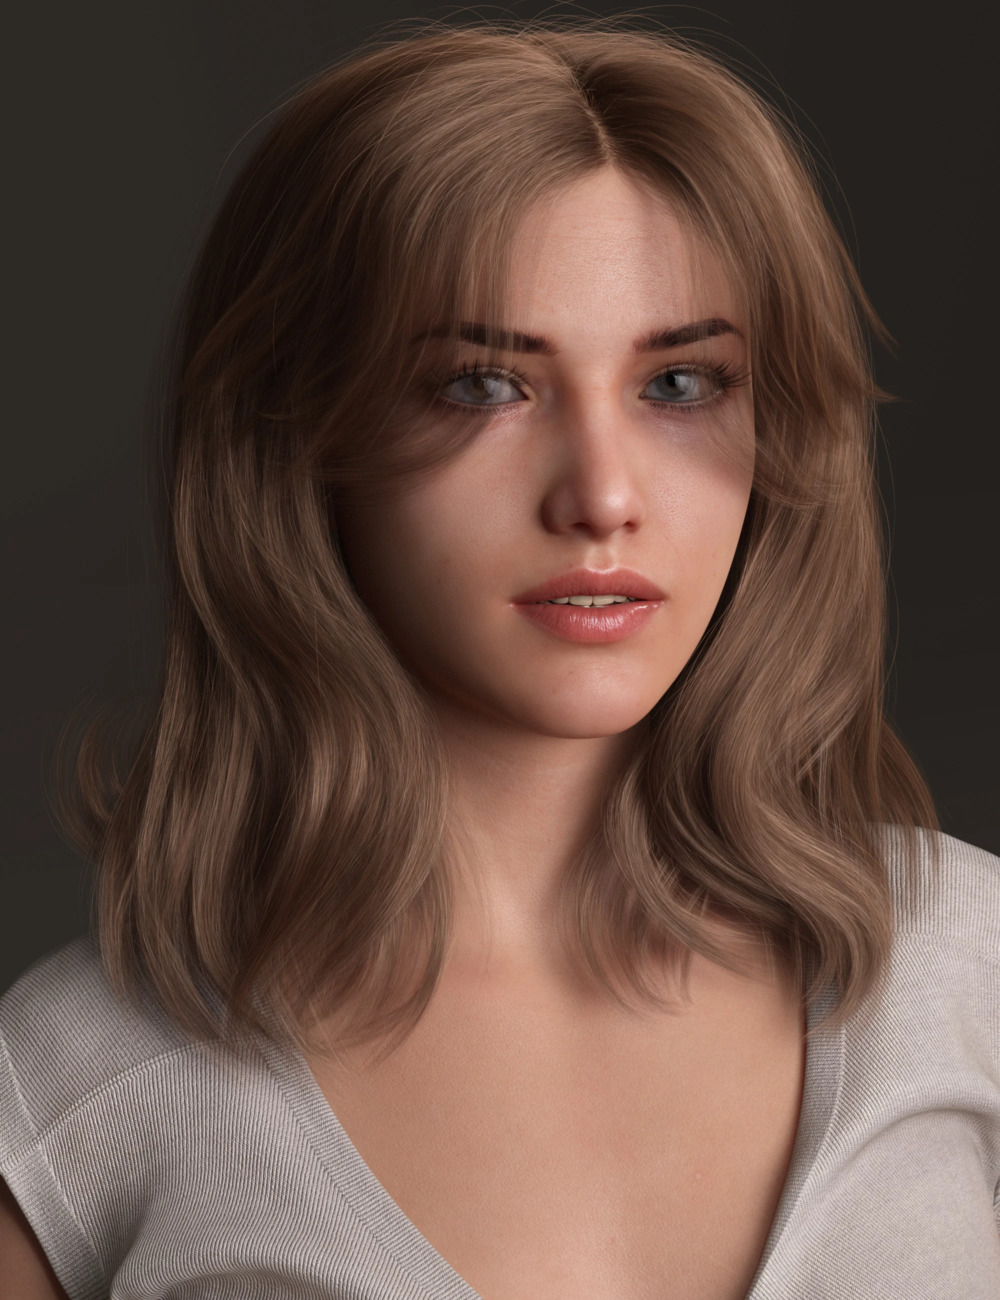 Layered Spring Style Hair for Genesis 8 and 8.1 Females